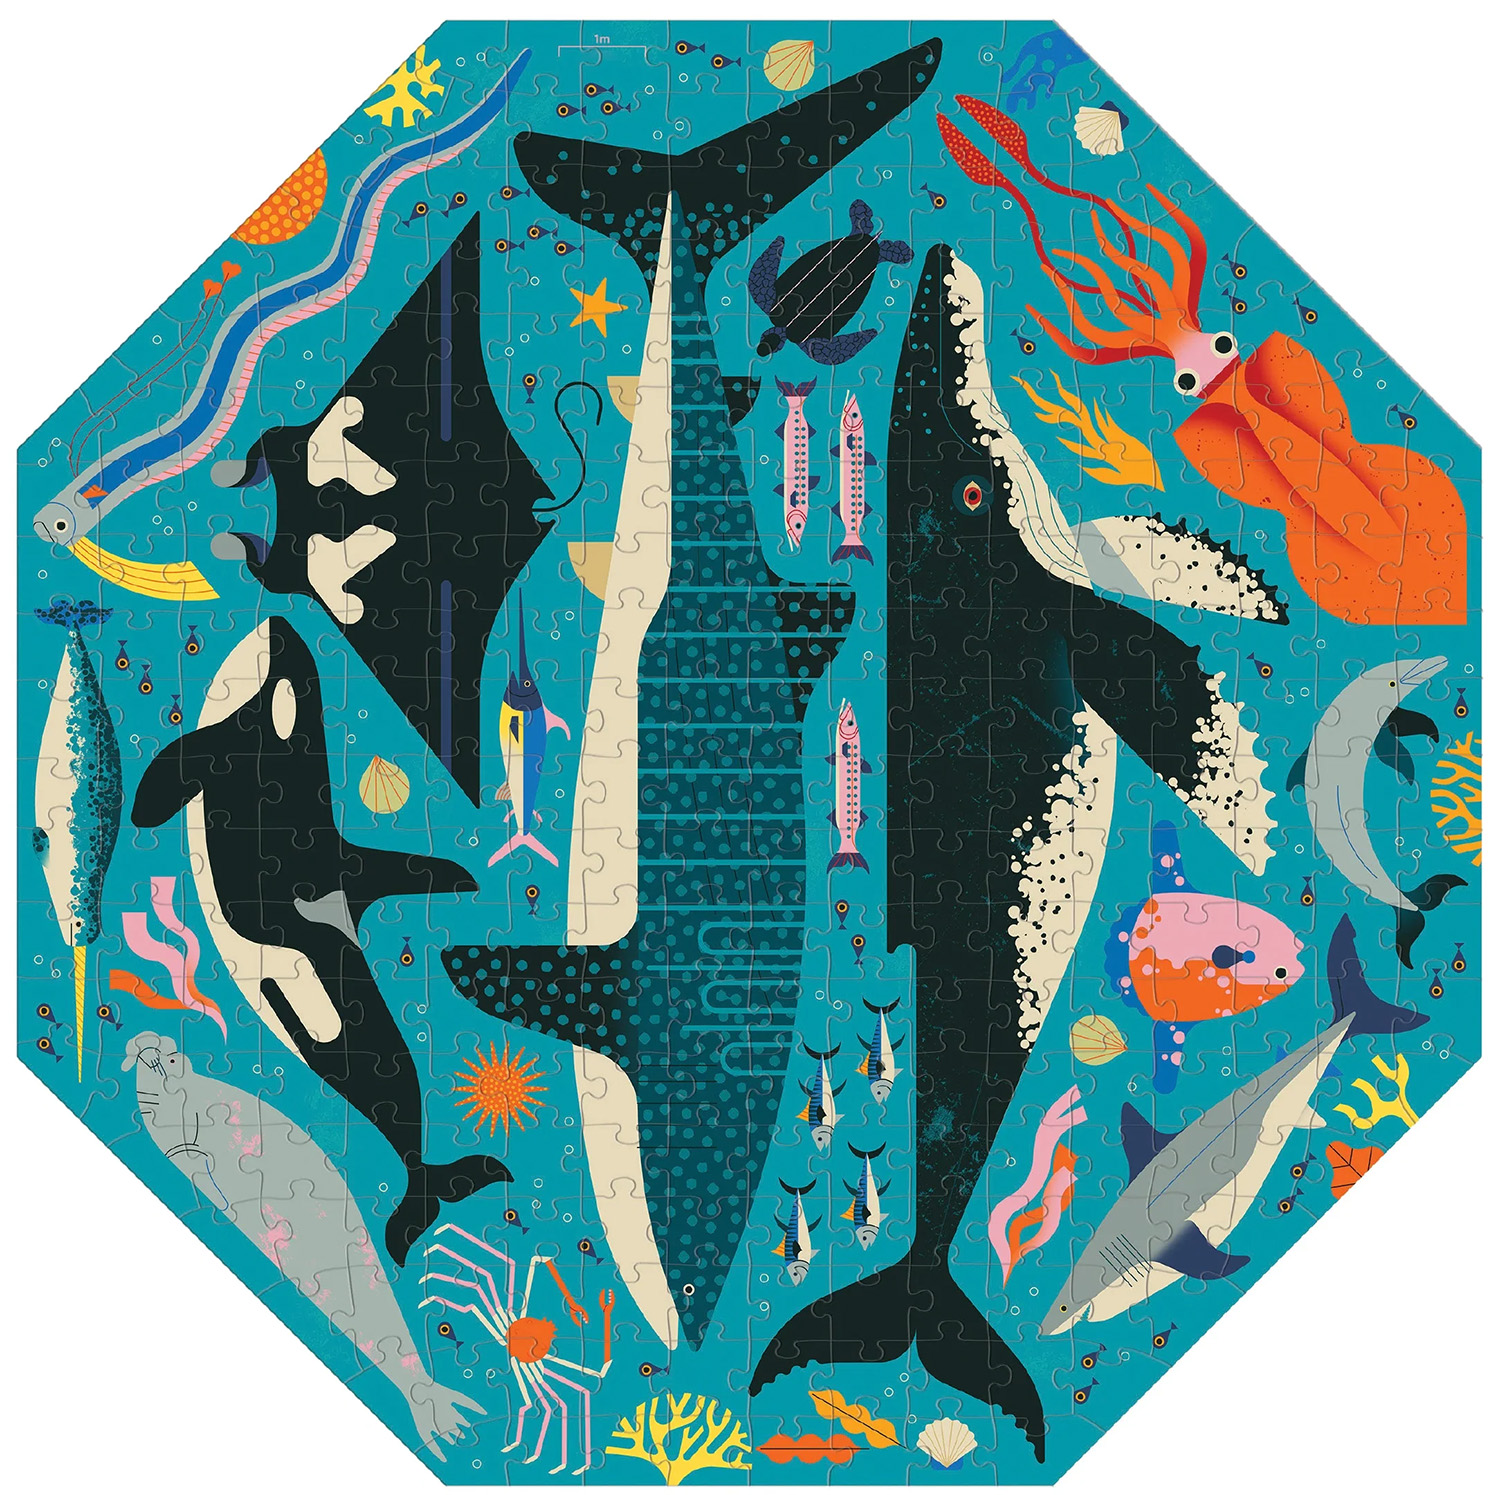 Ocean Life to Scale Octagon Shaped Puzzle